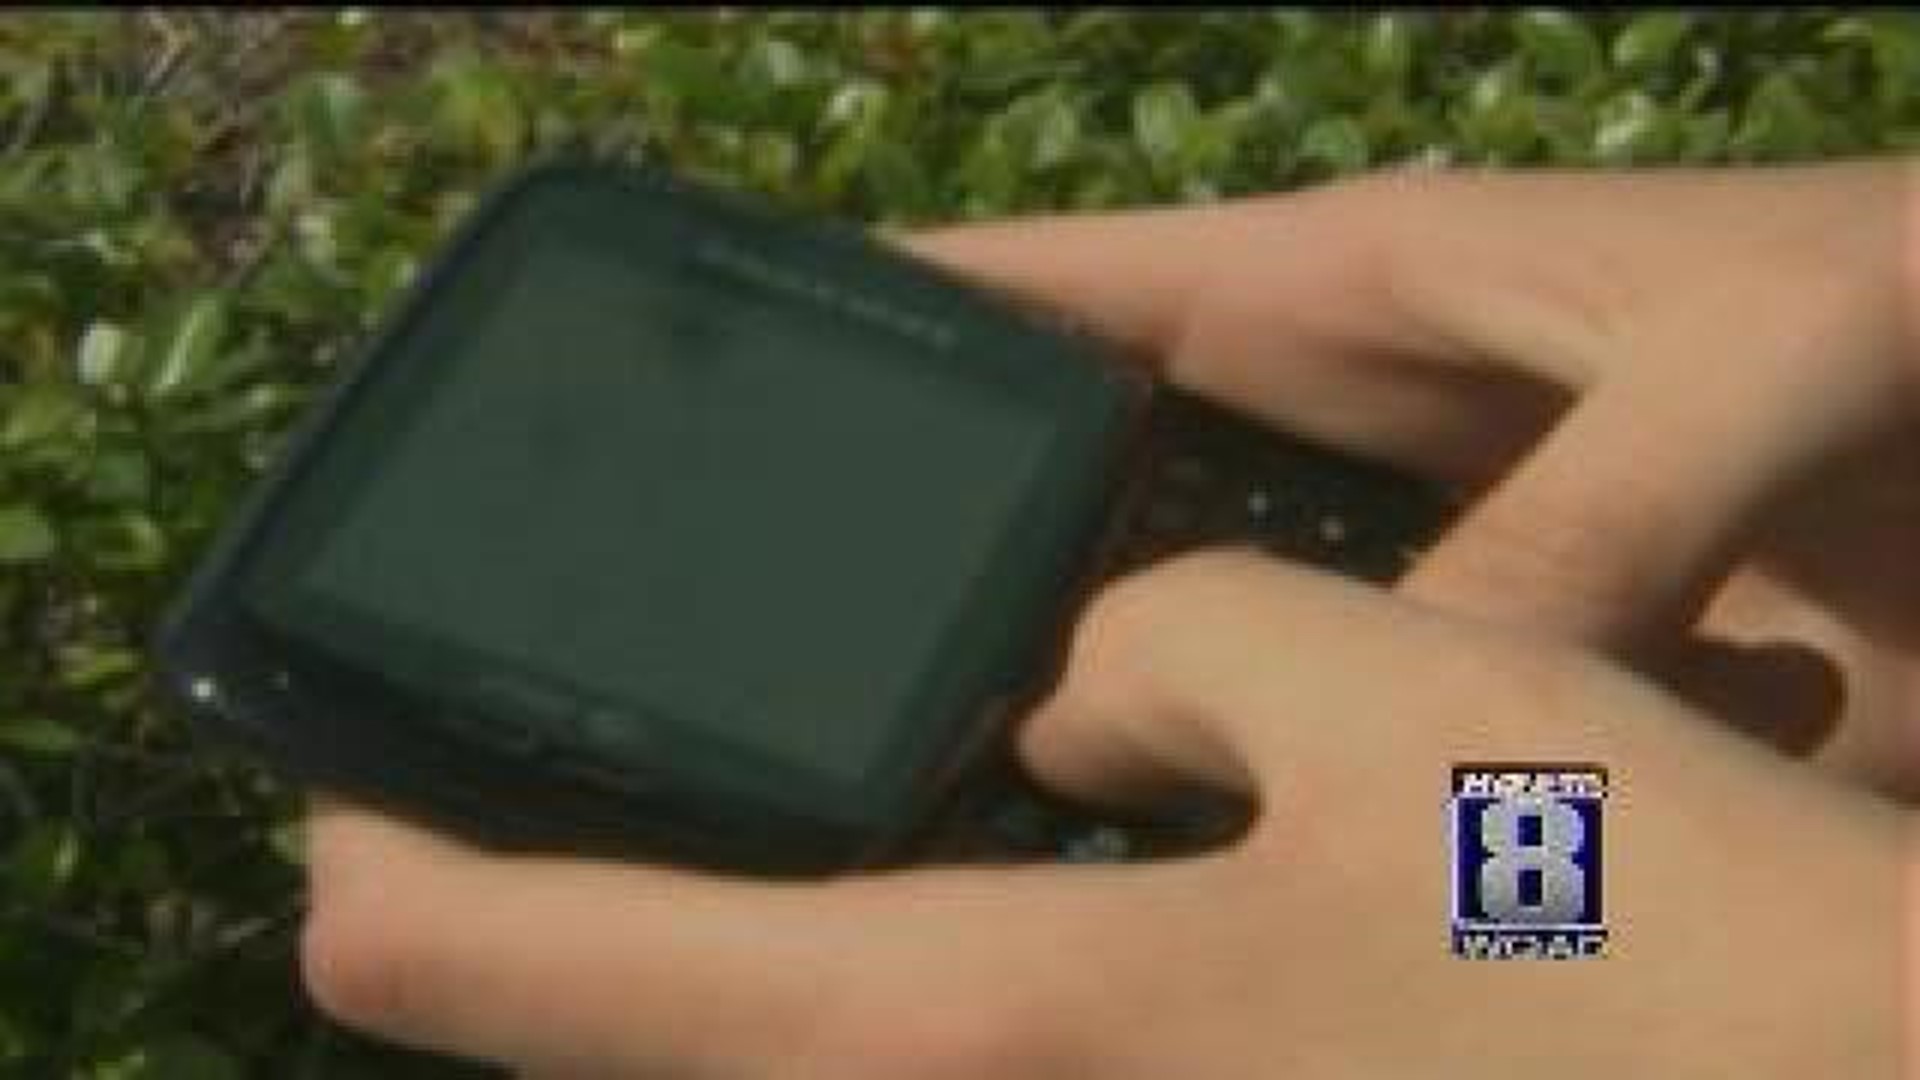 Cell phone thefts on the rise